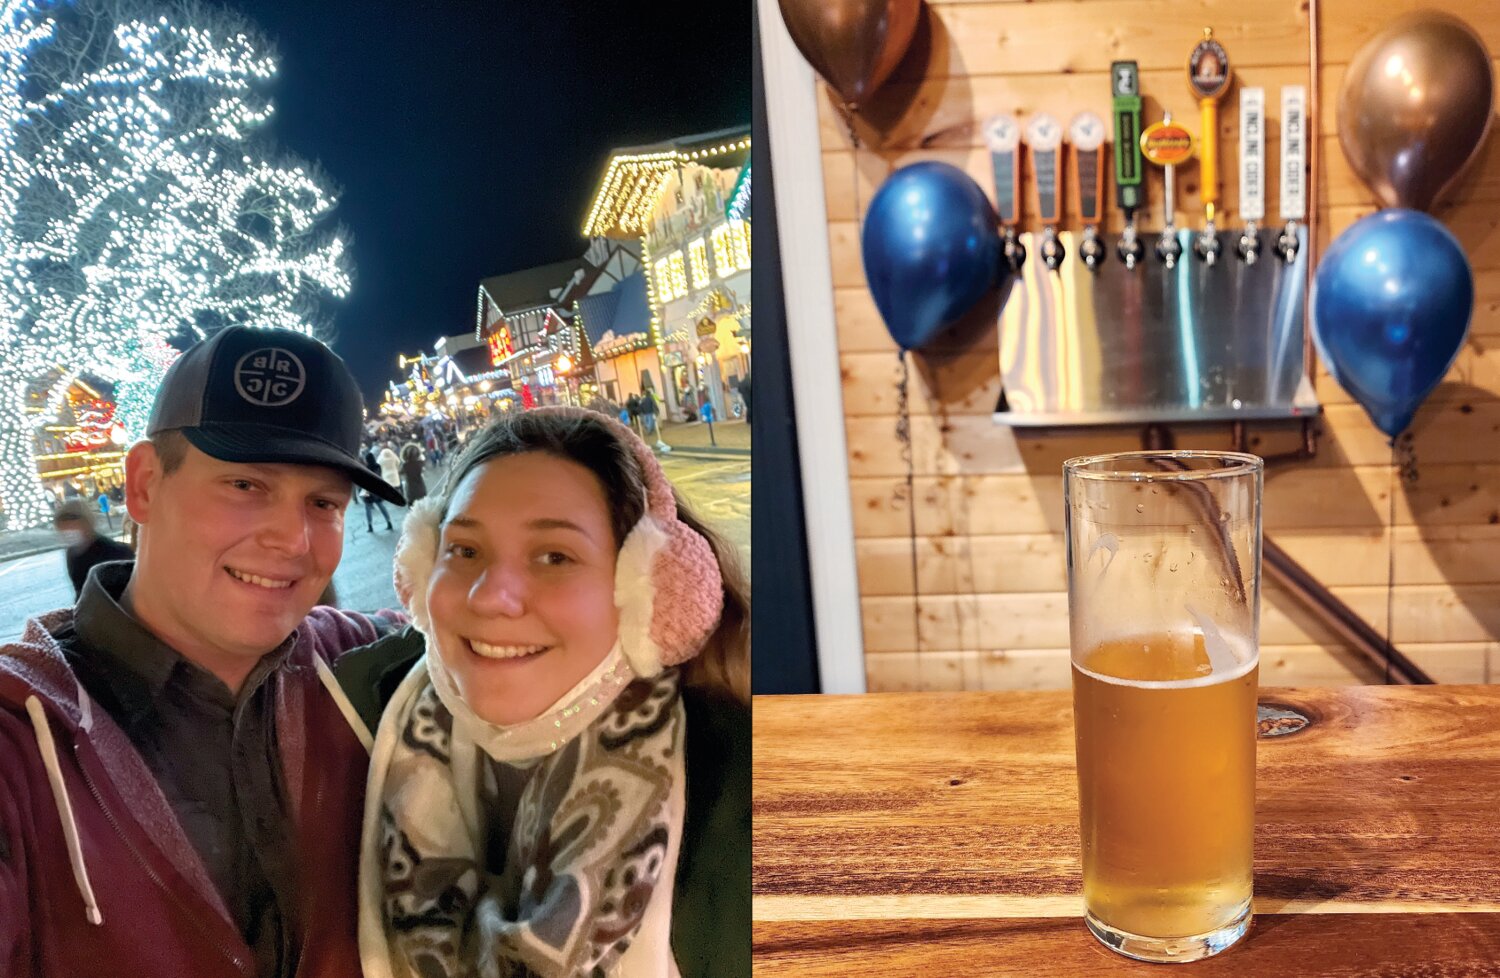 Owners Forrest Chesvick and his wife Aly began Good Buzz Brewing from a hobby of making mead — an alcoholic beverage made from fermented honey and other ingredients, such as fruit and herbs.